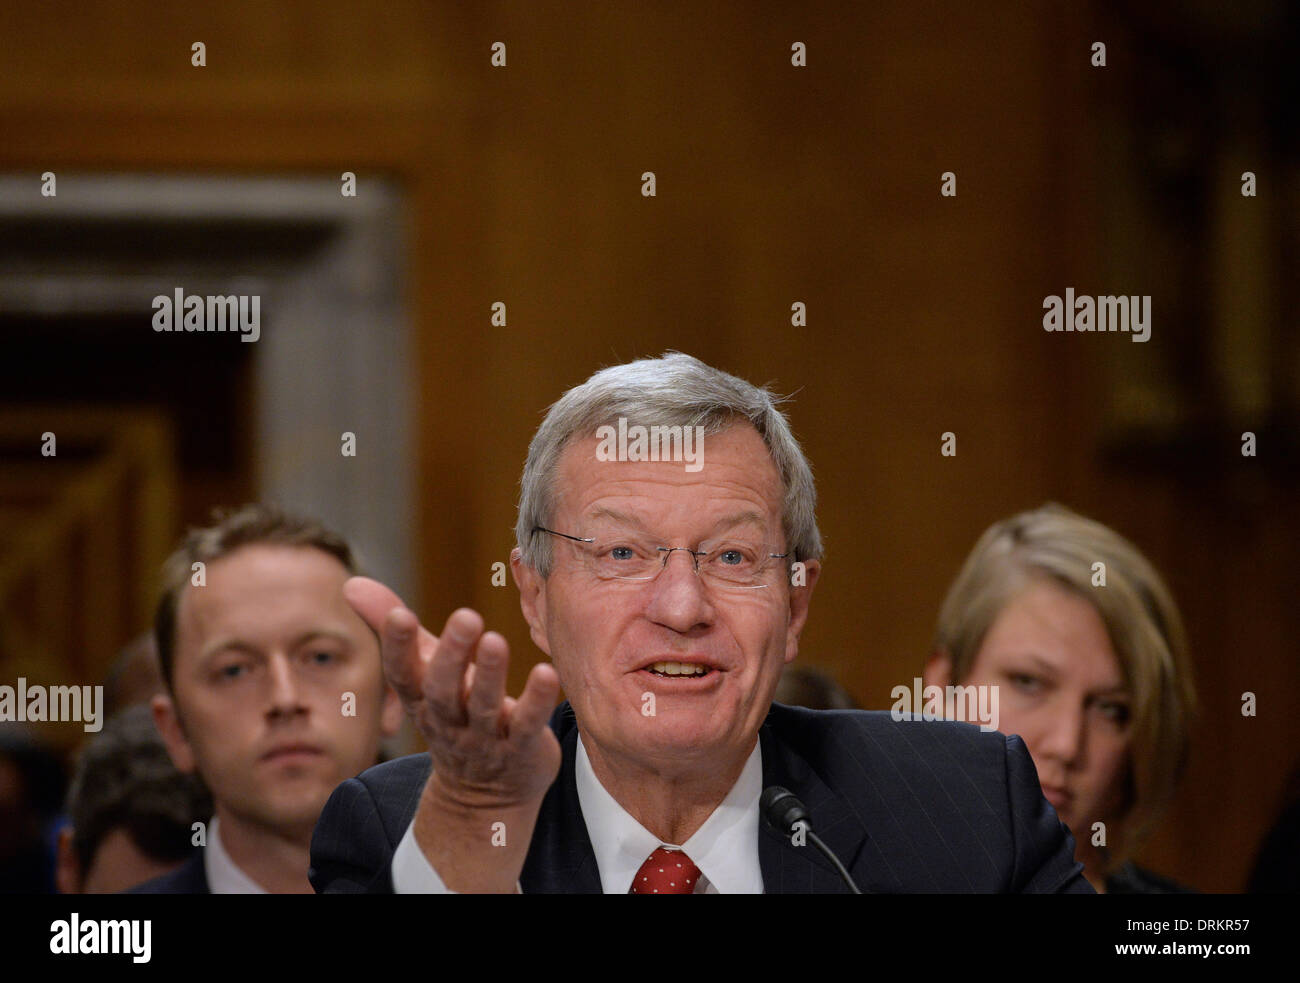 Washington DC, USA. 28th Jan, 2014. U.S. Senator Max Baucus (D-MT) testifies during his confirmation hearing to be the US ambassador to China before the Senate Foreign Relations Committee on Capitol Hill in Washington DC, capital of the United States, Jan. 28, 2014. Max Baucus, President Barack Obama's pick for the new American ambassador to China, on Tuesday promised to work hard to improve Sino-U.S. relationship, which he called as 'one of the most important bilateral relationships in the world.' Credit:  Zhang Jun/Xinhua/Alamy Live News Stock Photo